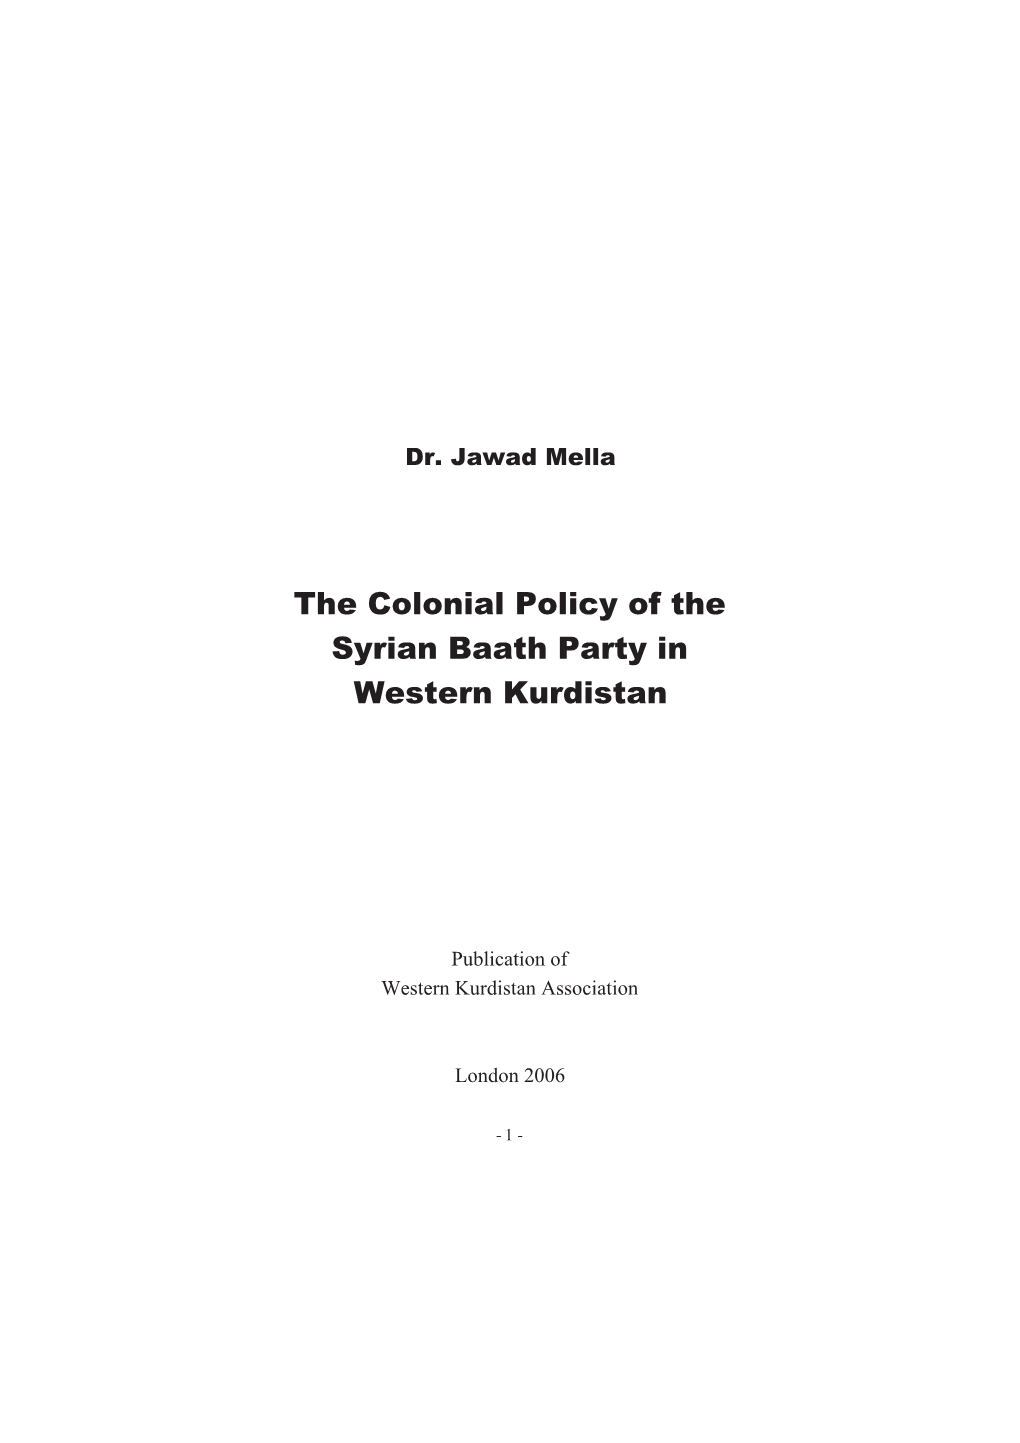 The Colonial Policy of the Syrian Baath Party in Western Kurdistan